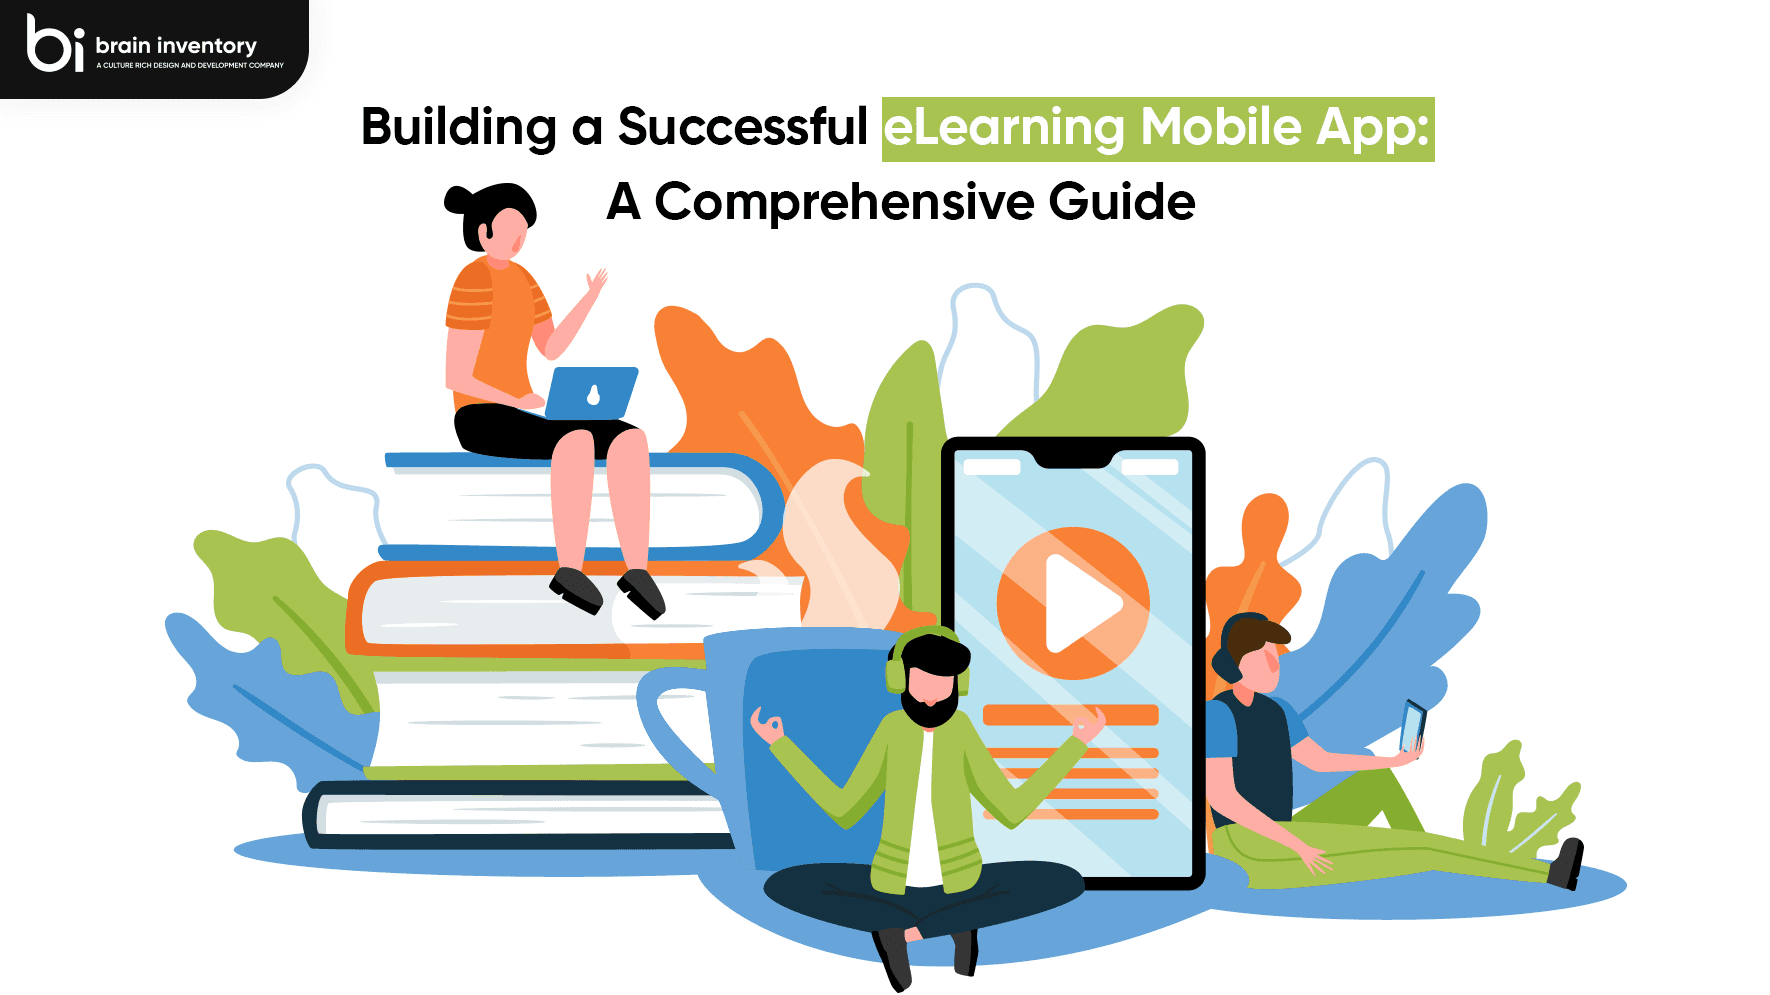 Building a Successful eLearning Mobile App: A Comprehensive Guide